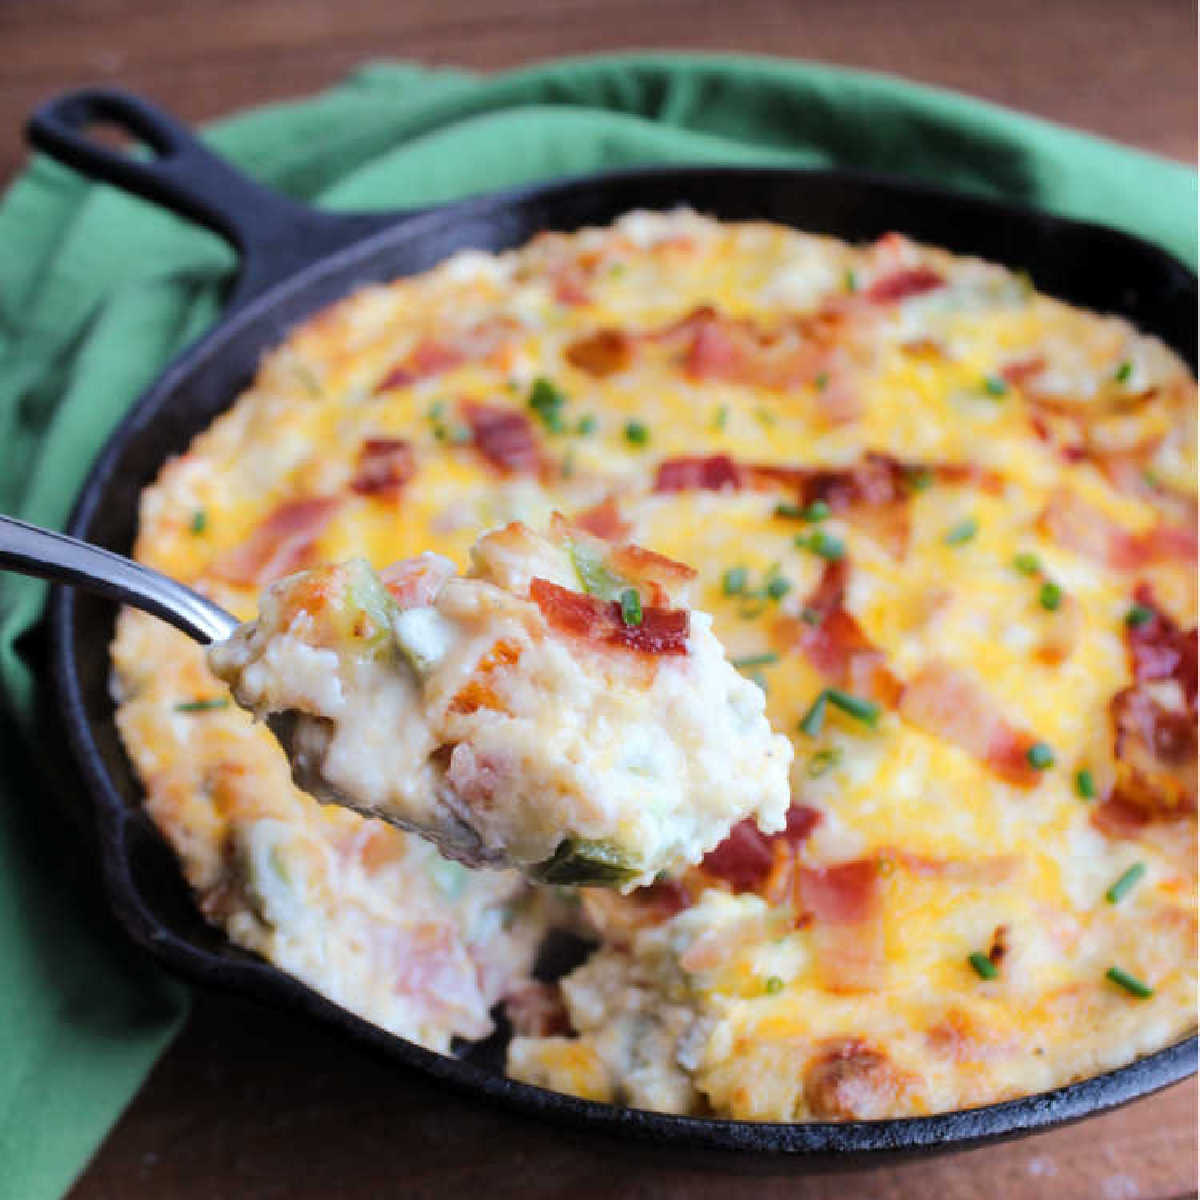 spoonful of melty, gooey, cheesy jalapeno popper dip being lifted out of cast iron pan.